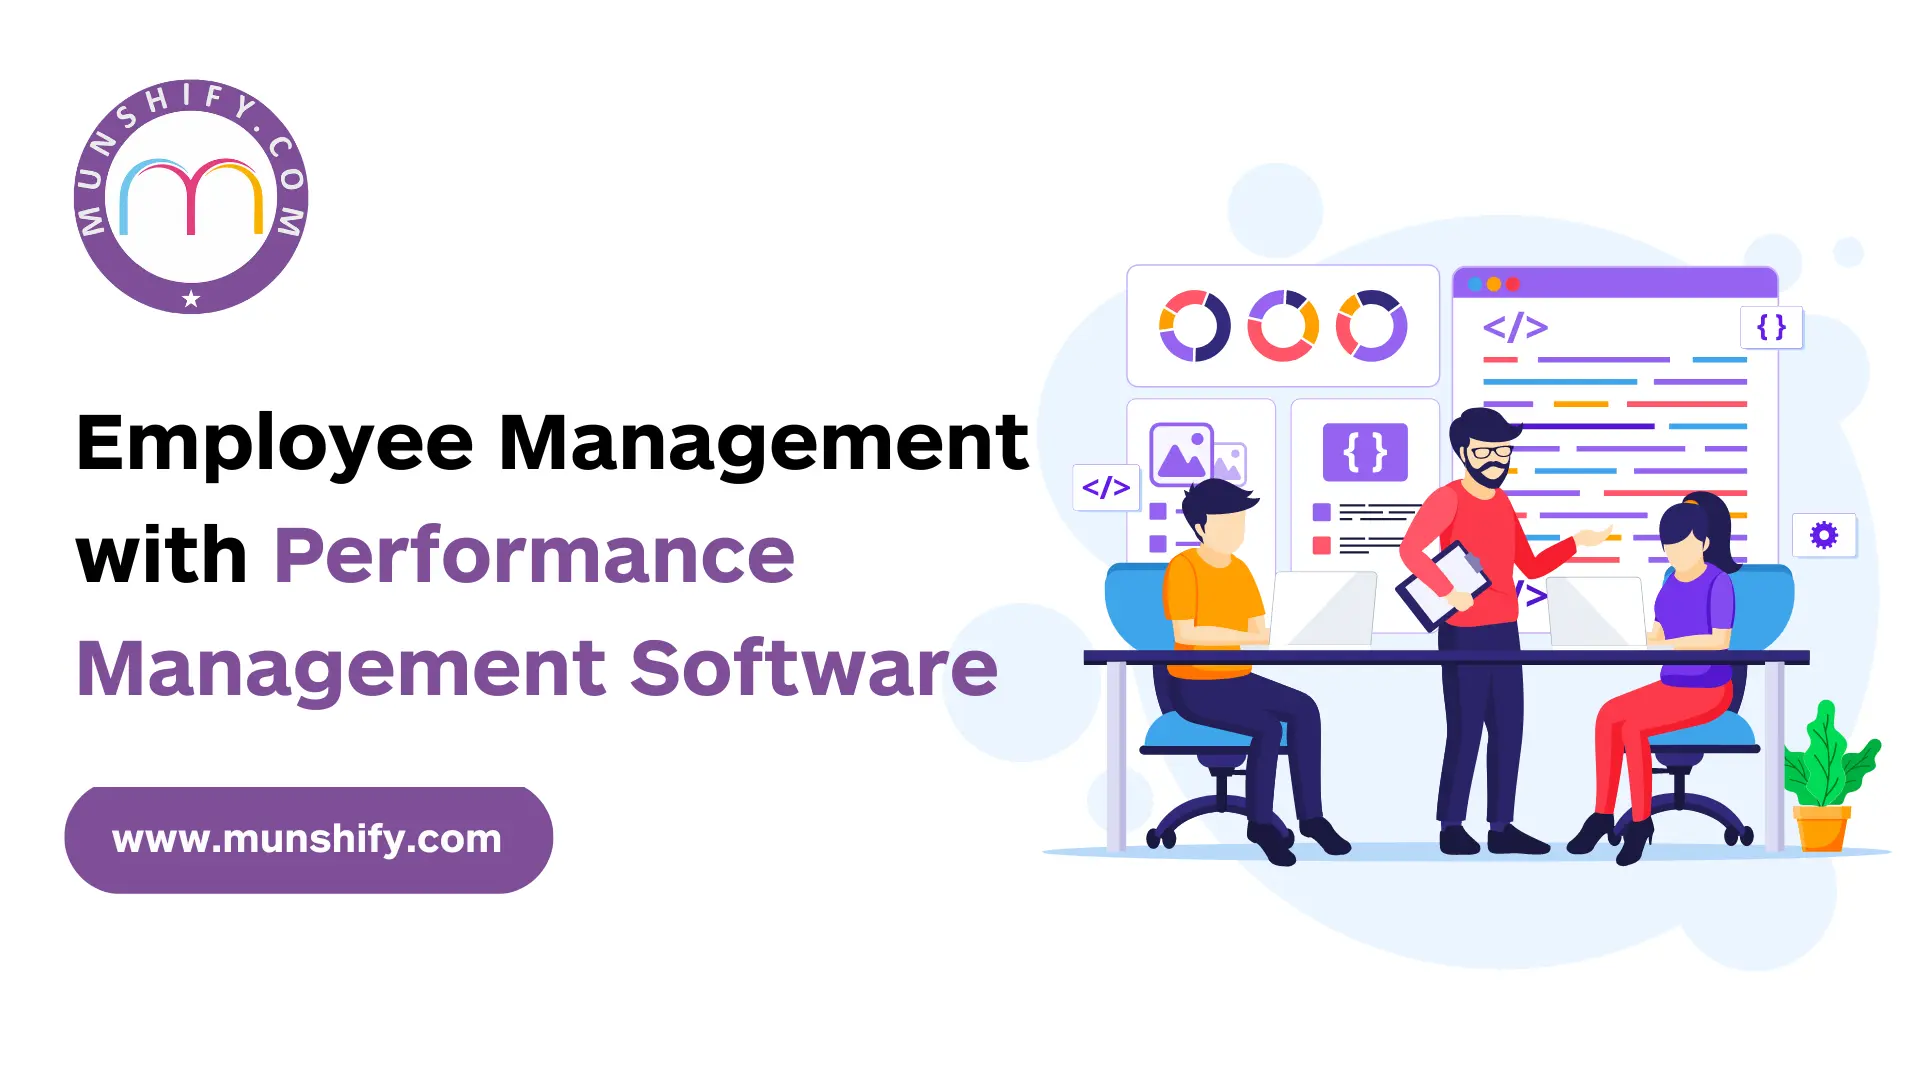 Employee Management with Performance Management Software